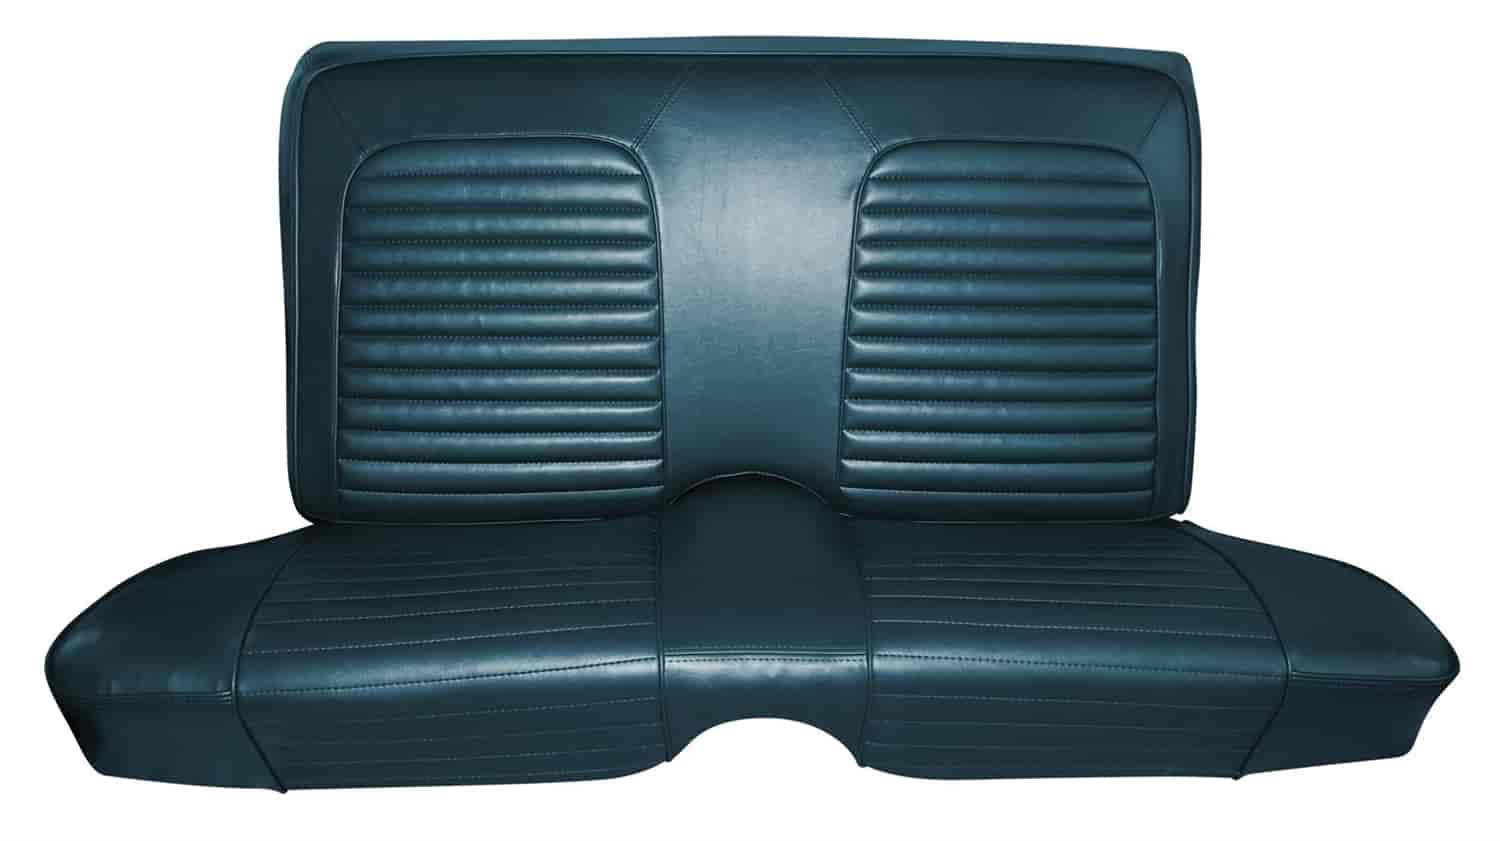 1963 Ford Falcon Futura Sedan Inteior with Front Bench Seat Front and Rear Upholstery Set